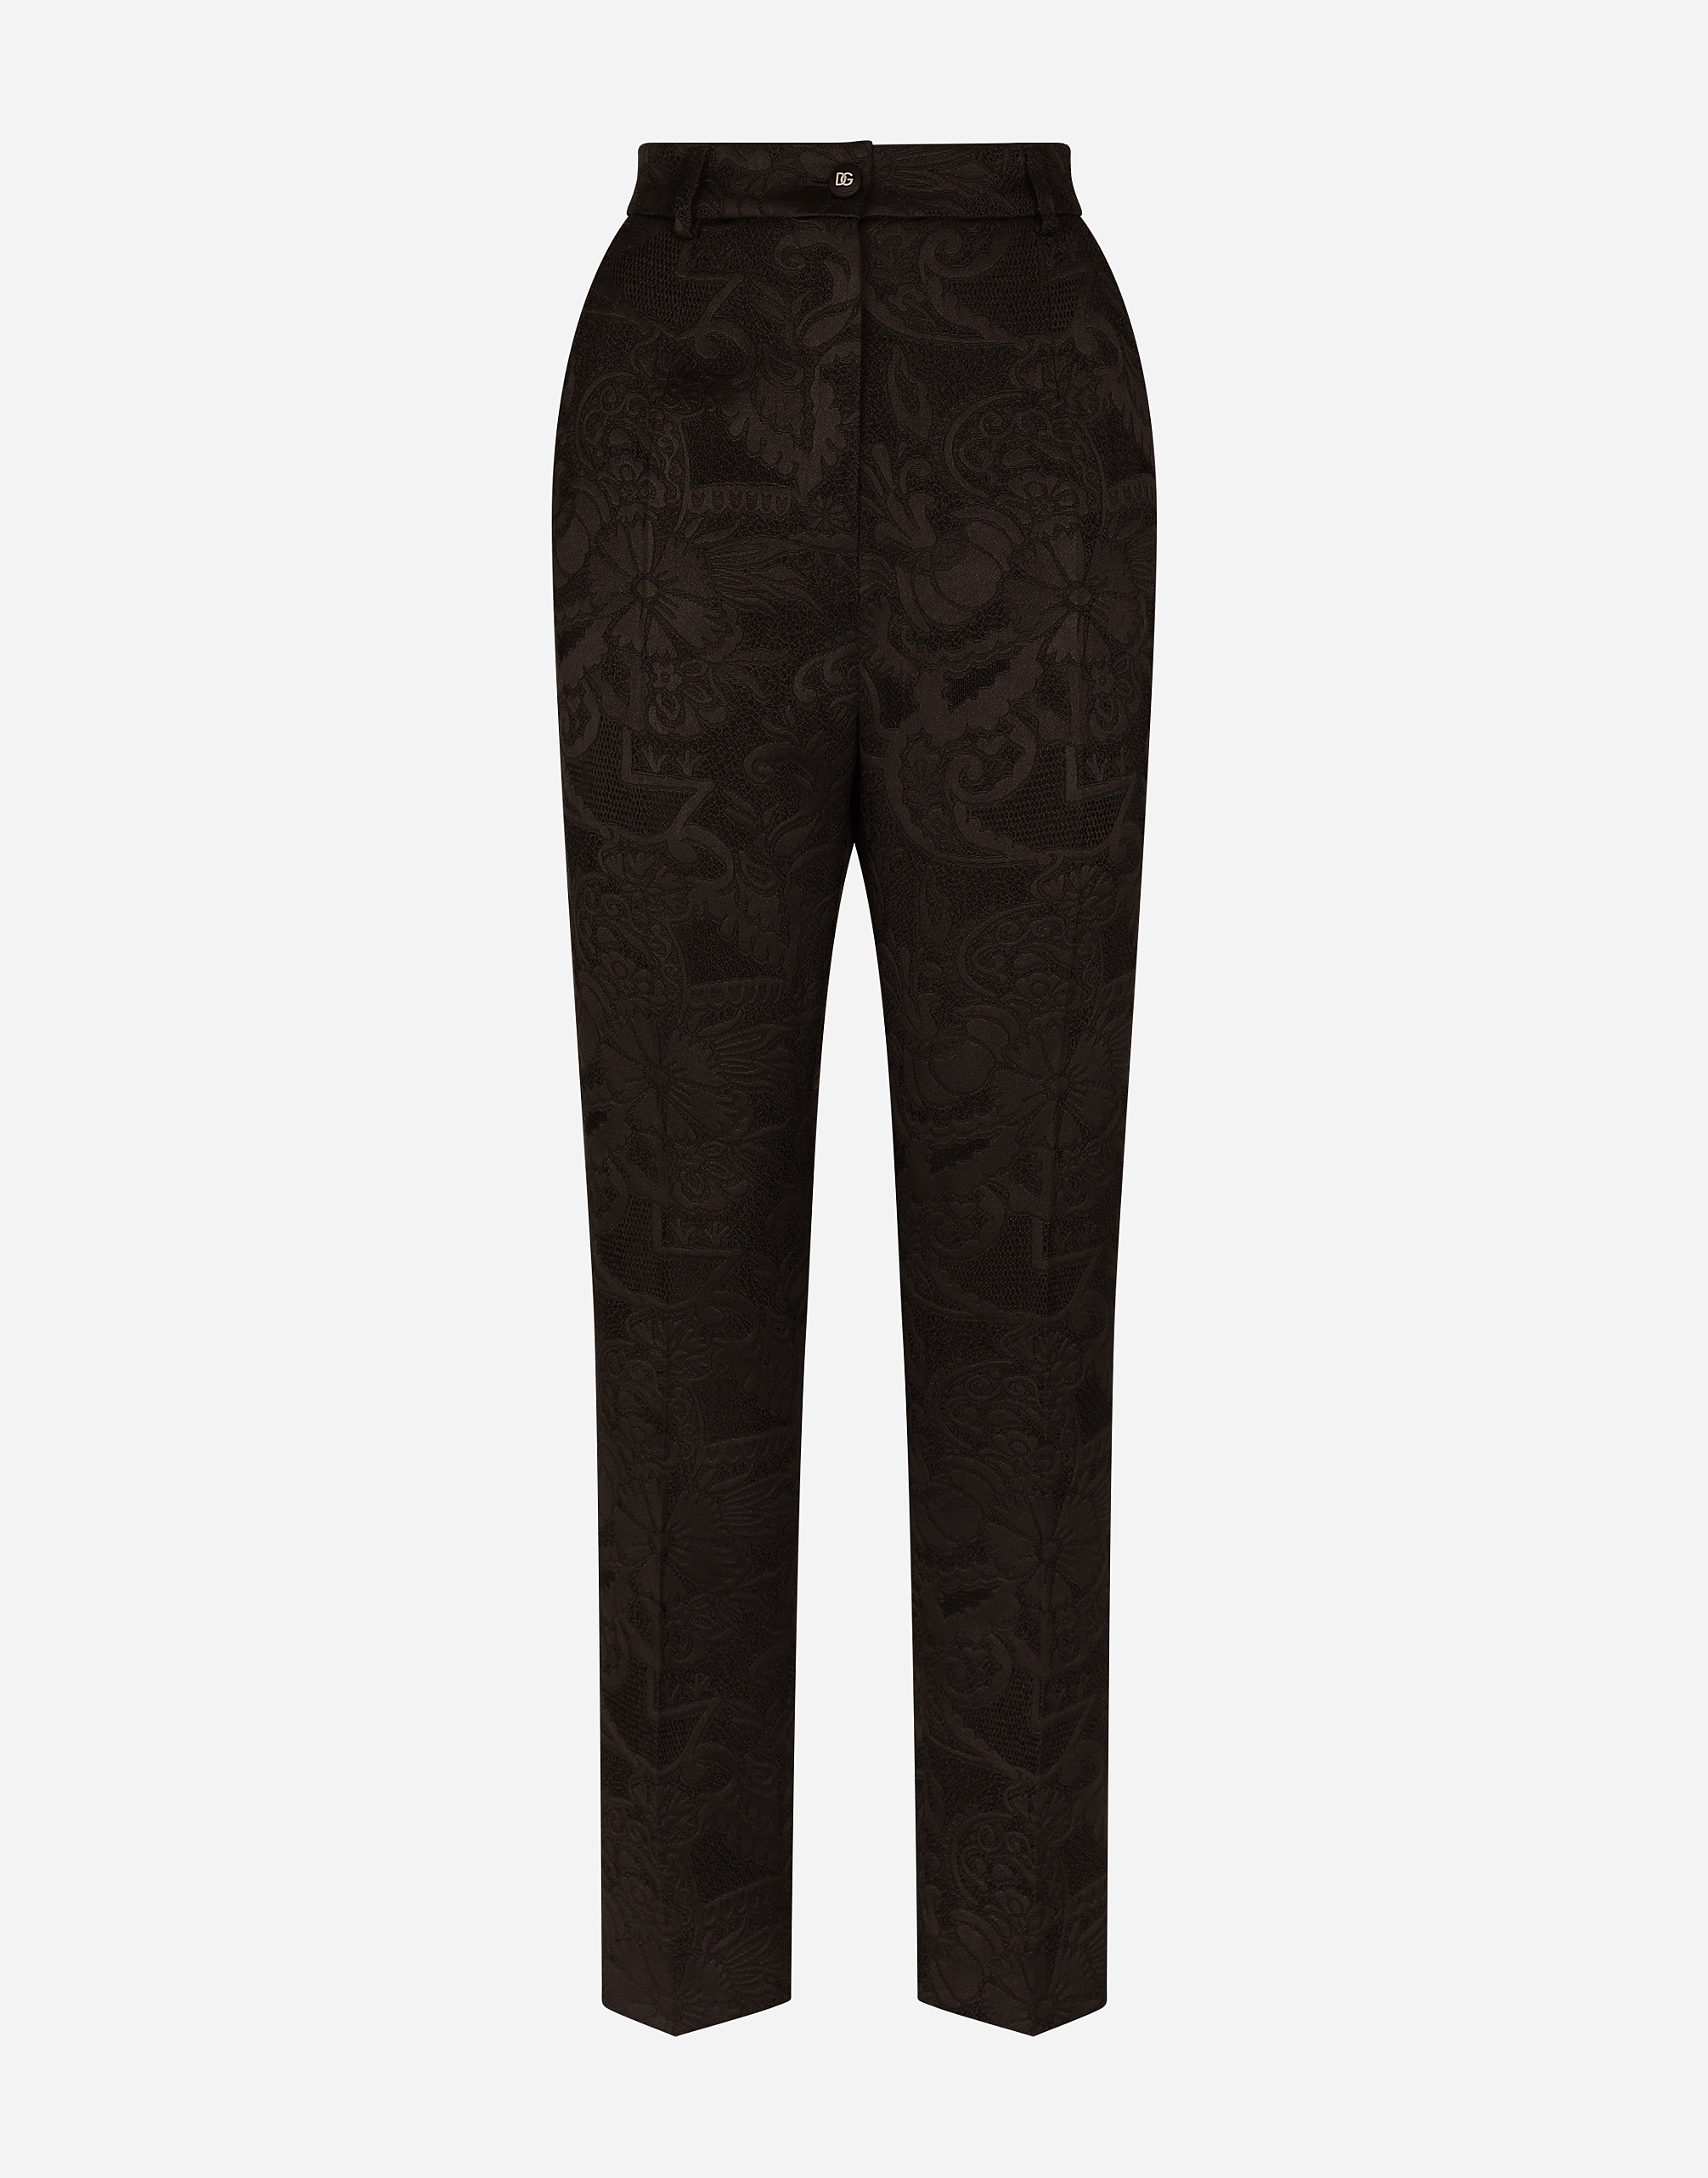 Dolce & Gabbana Floral Jacquard Trousers In Black